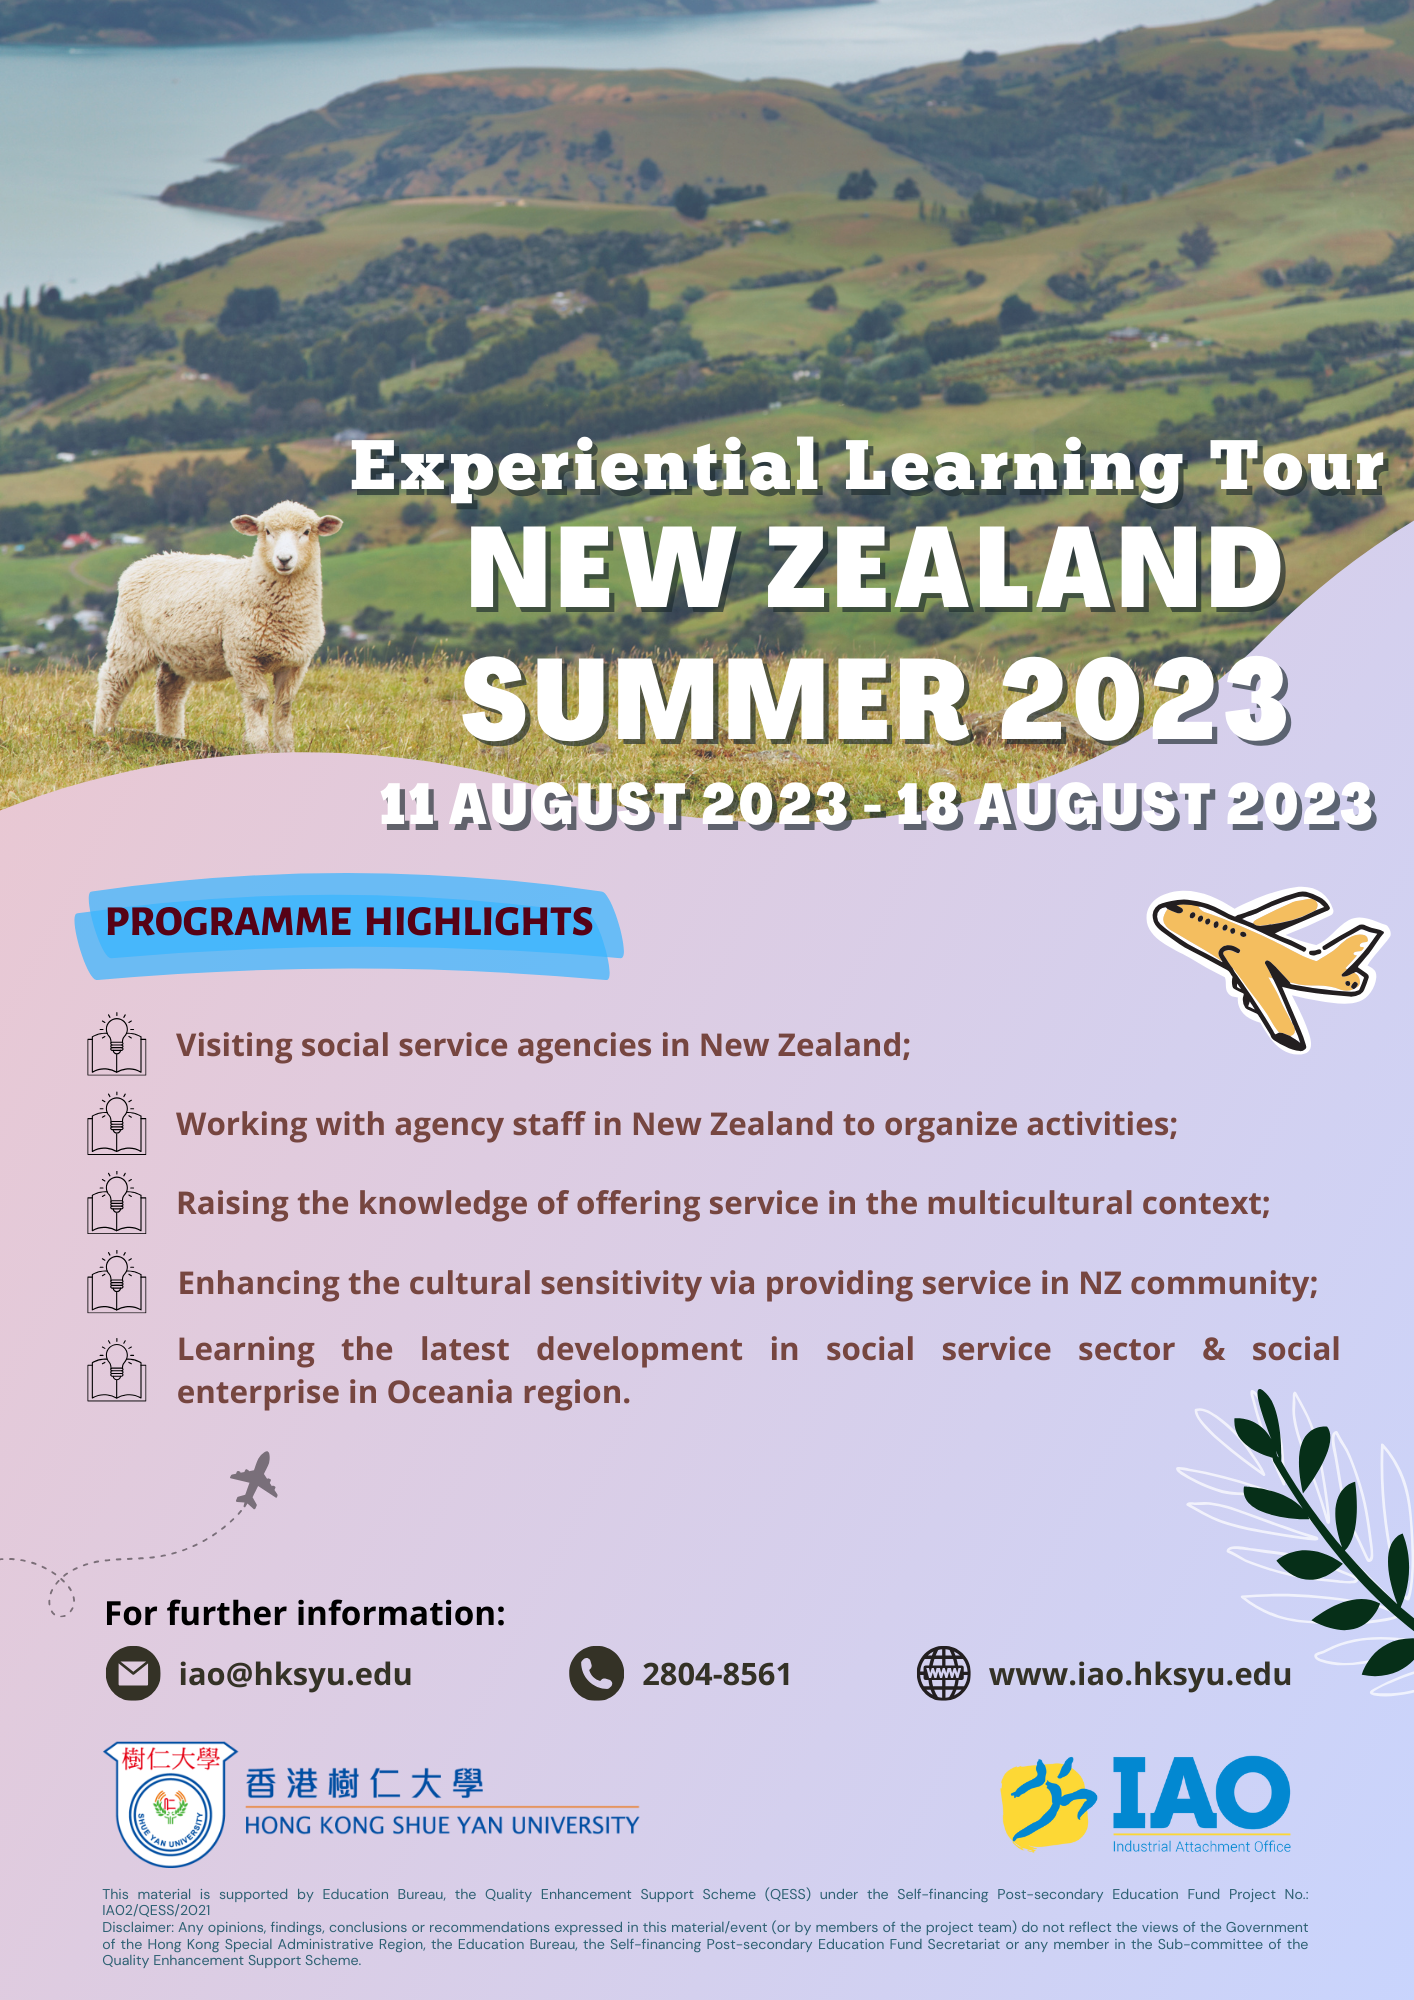 Experiential Learning Tour to New Zealand